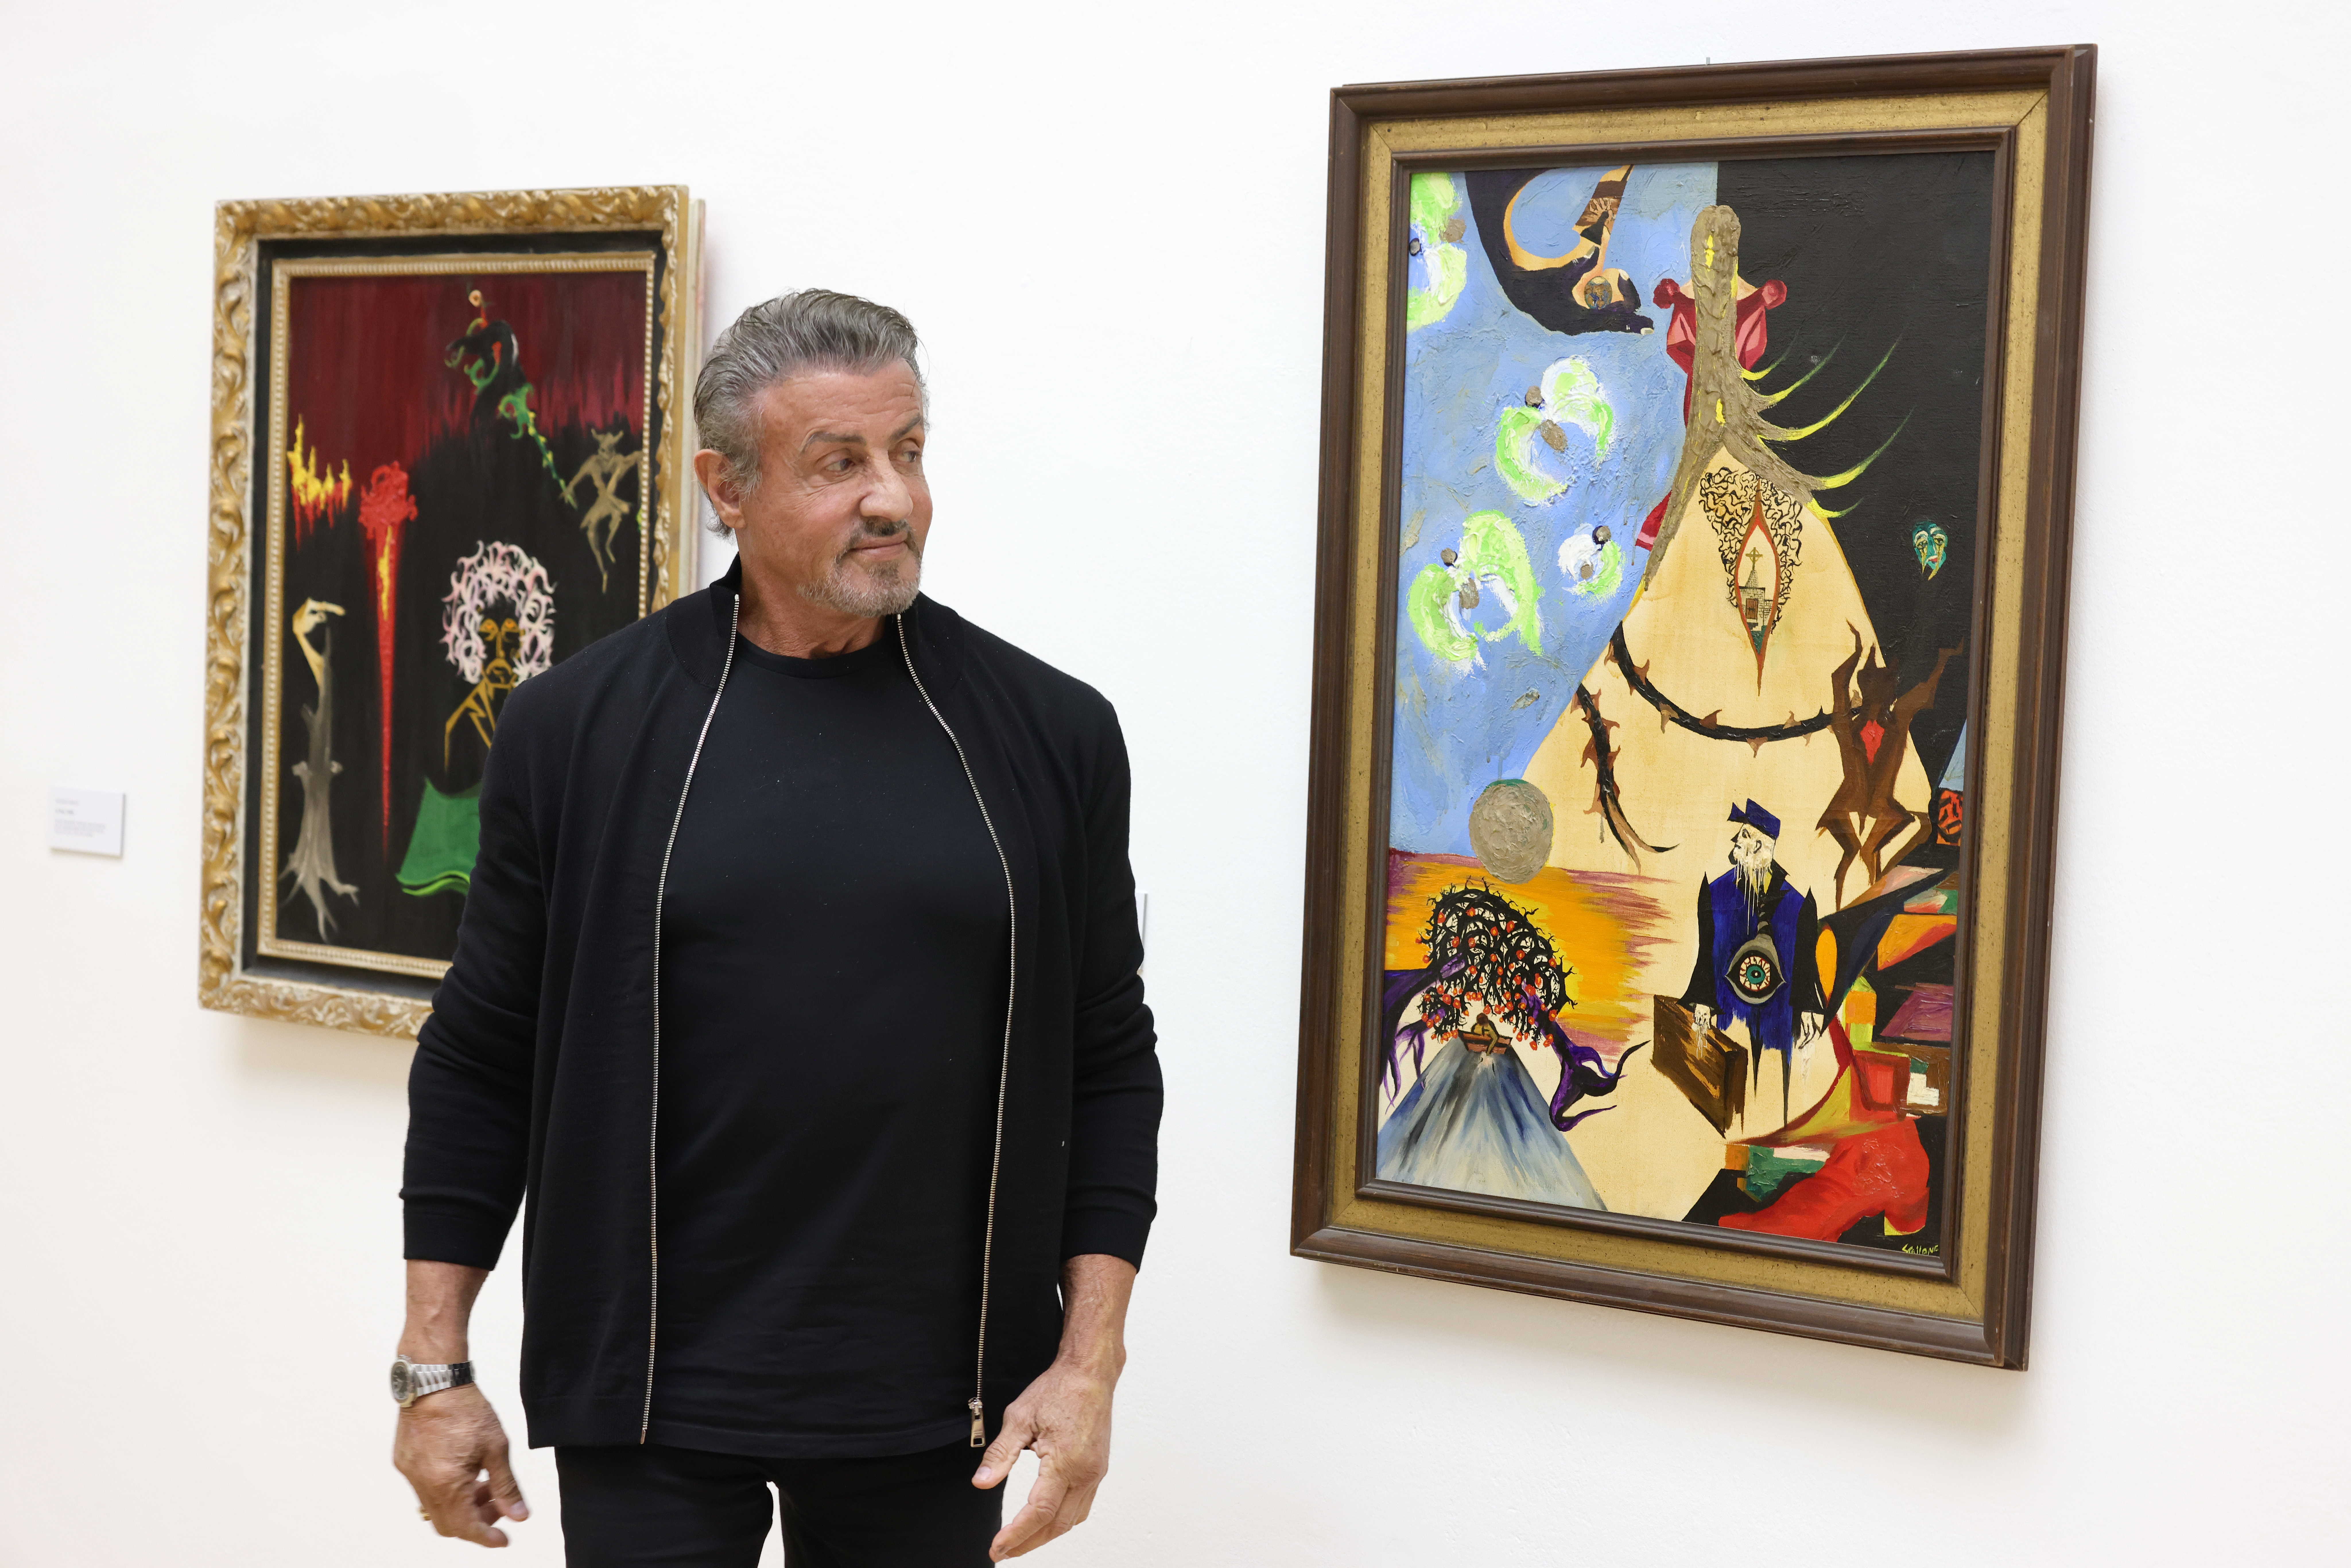 HAGEN, GERMANY - DECEMBER 03: Sylvester Stallone reviews his painting during the opening of the exhibition 